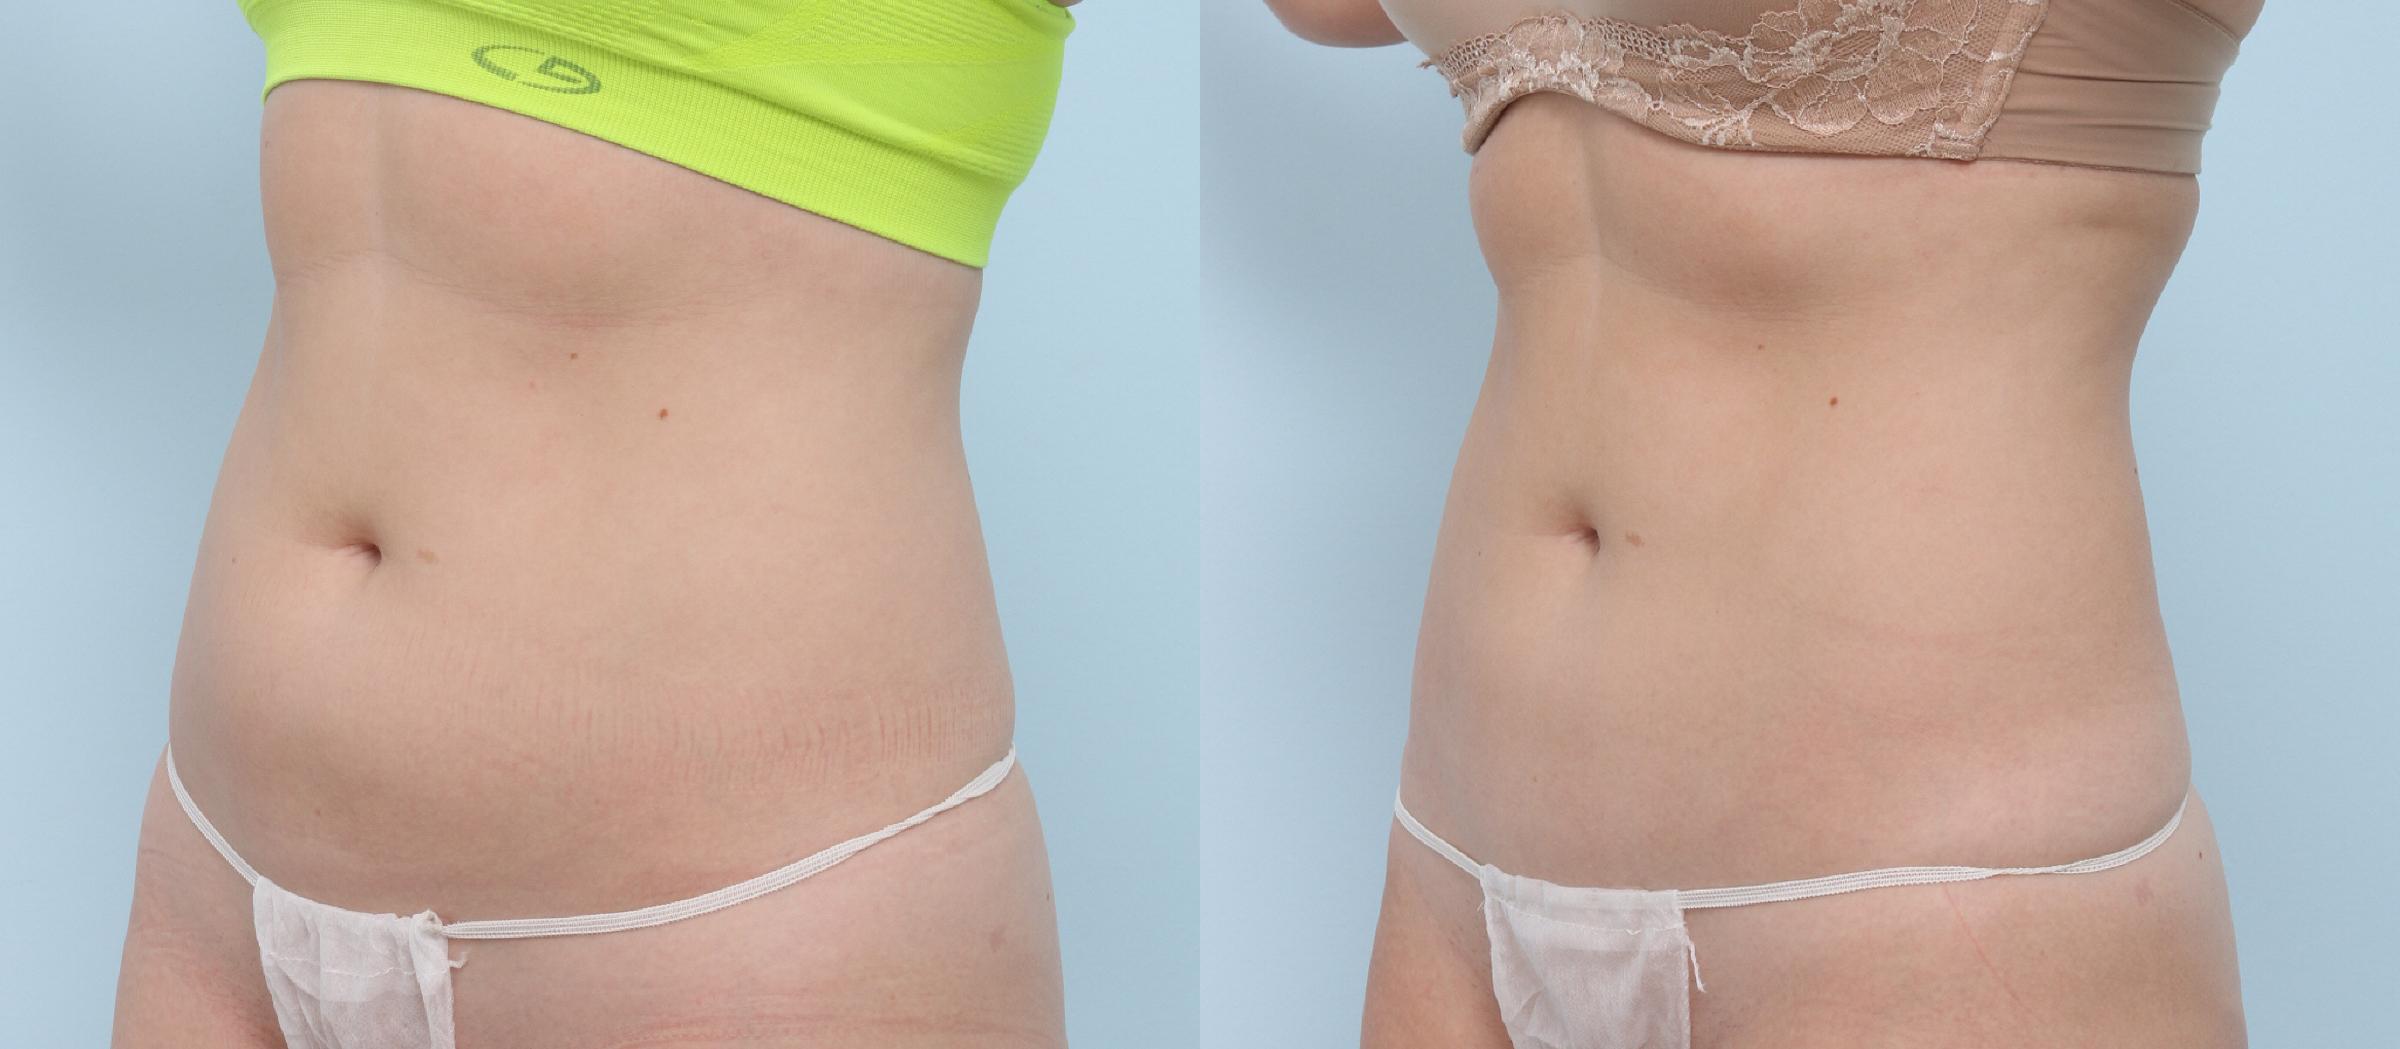  before and after pictures in , , 5 CoolSculpting Myths About Noninvasive Fat Reduction